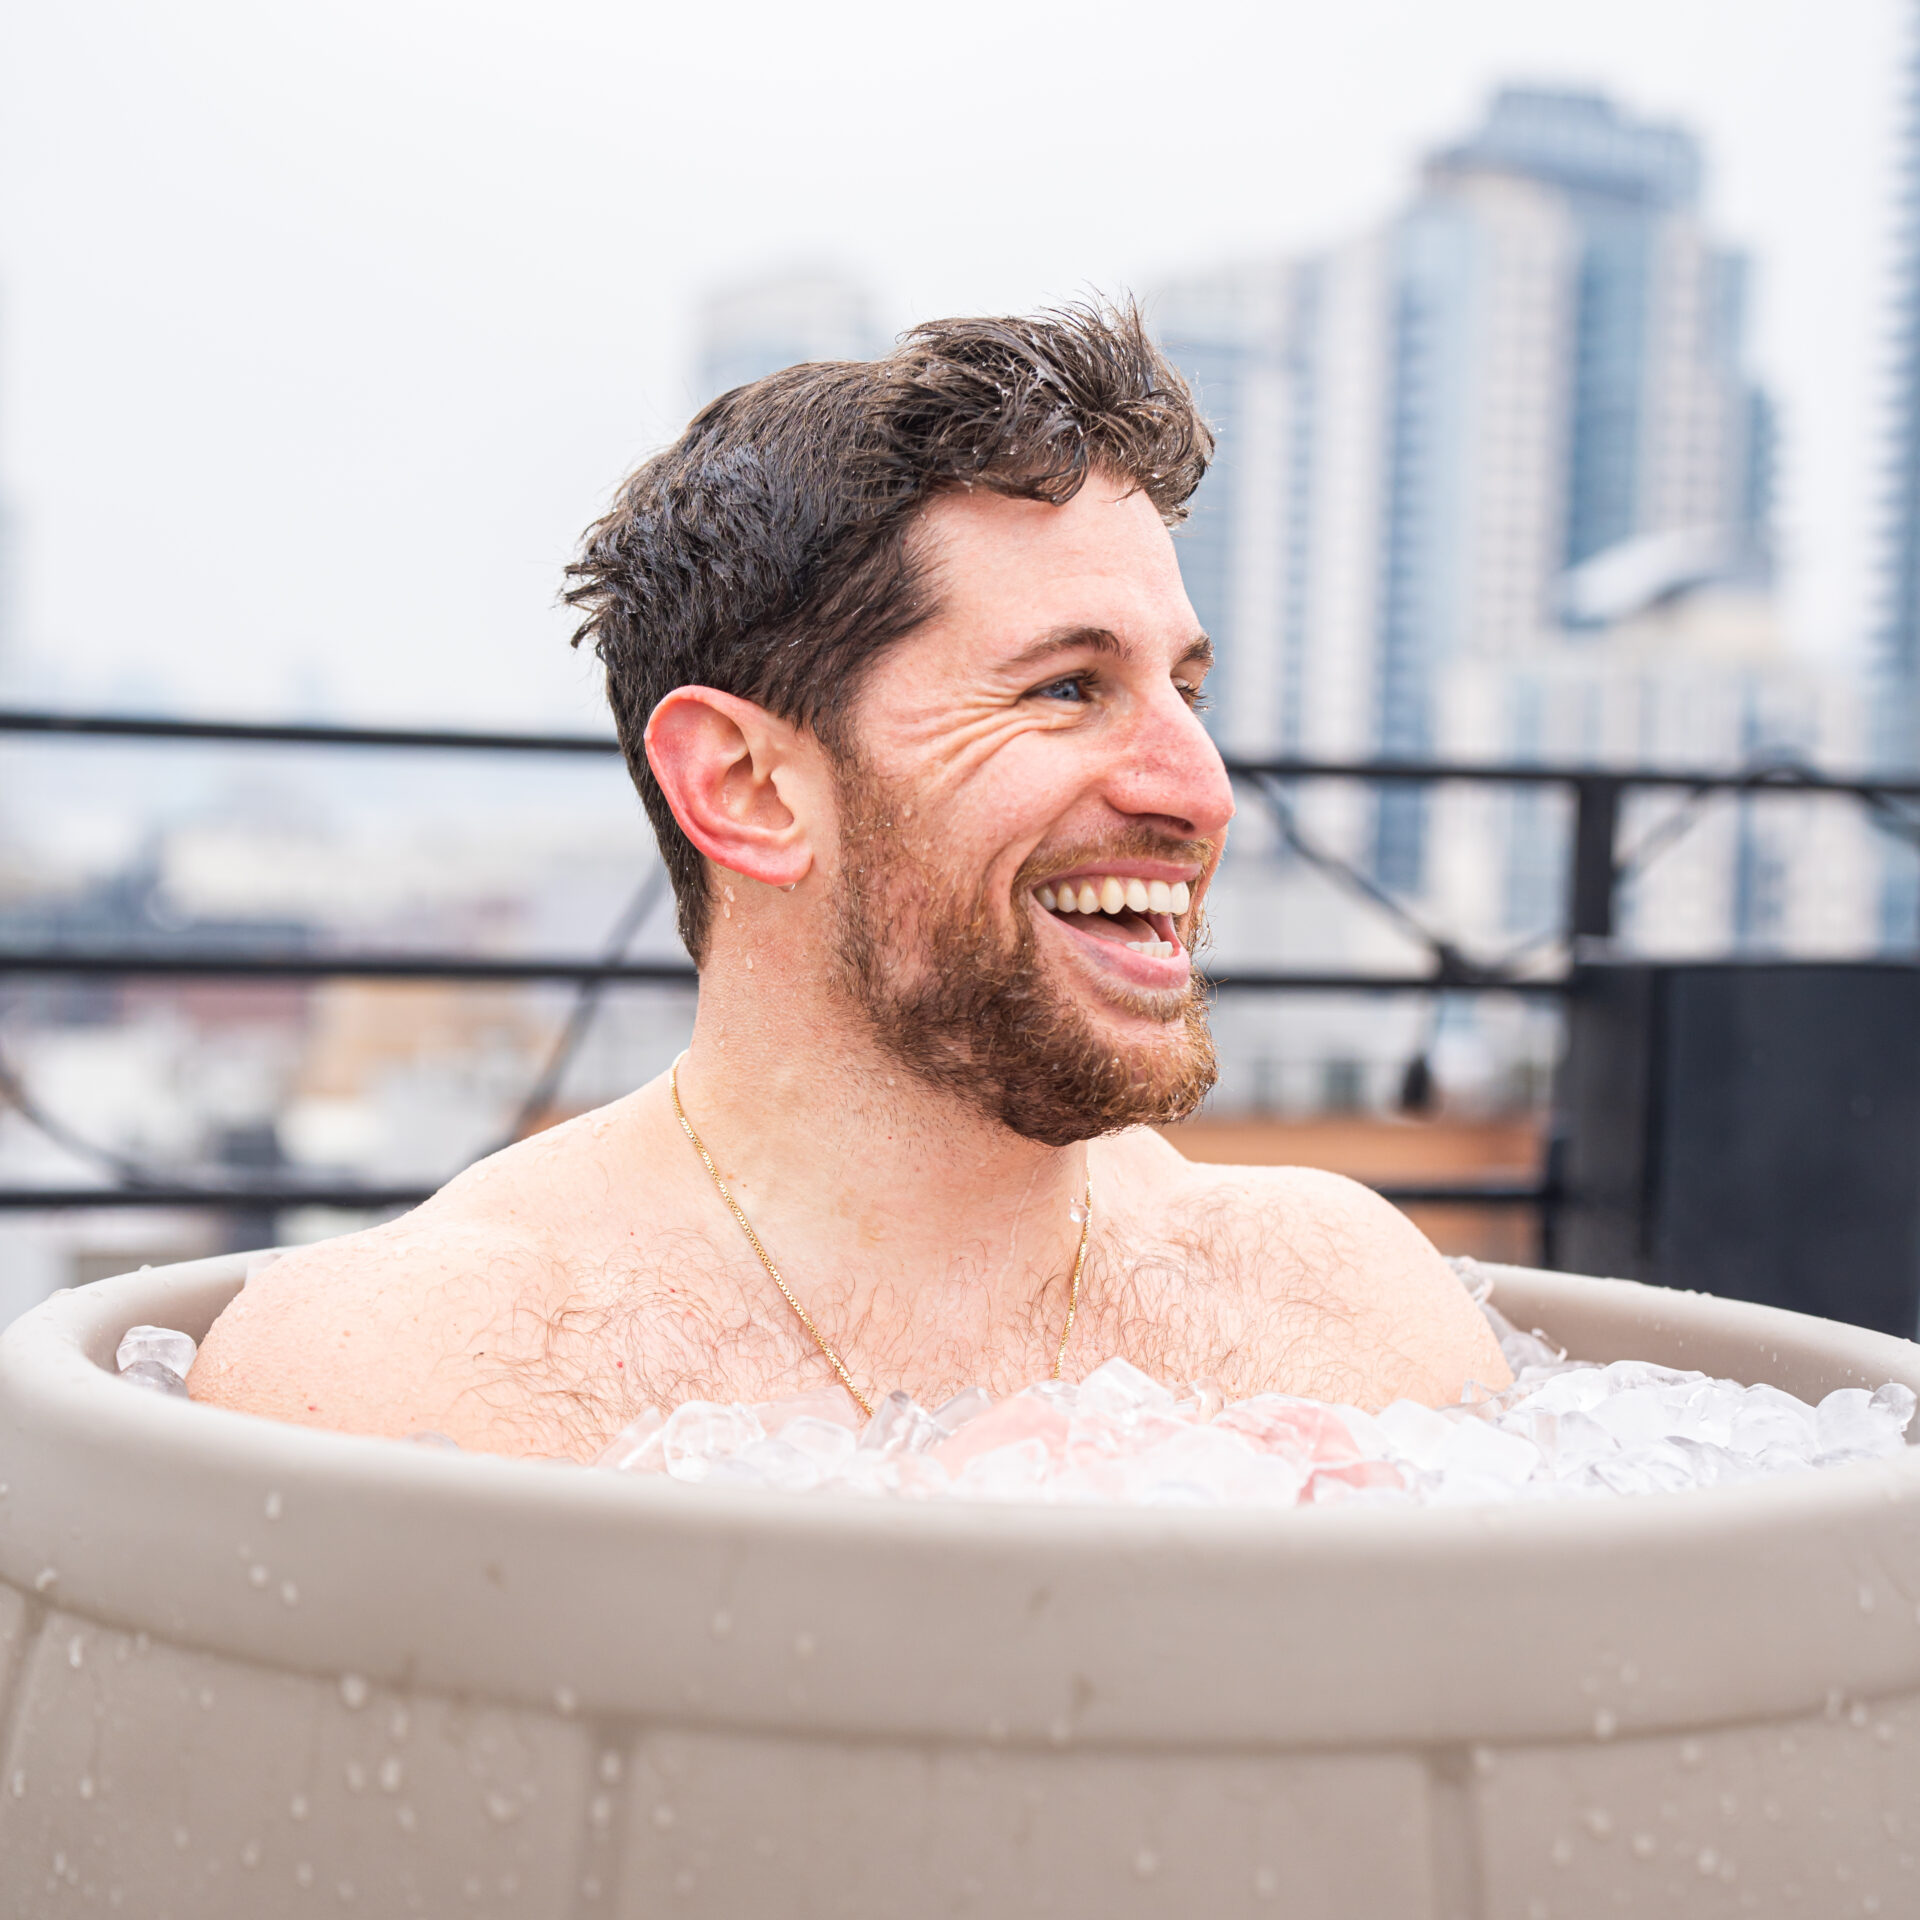 Man smiling during an ice bath in an Ice Barrel